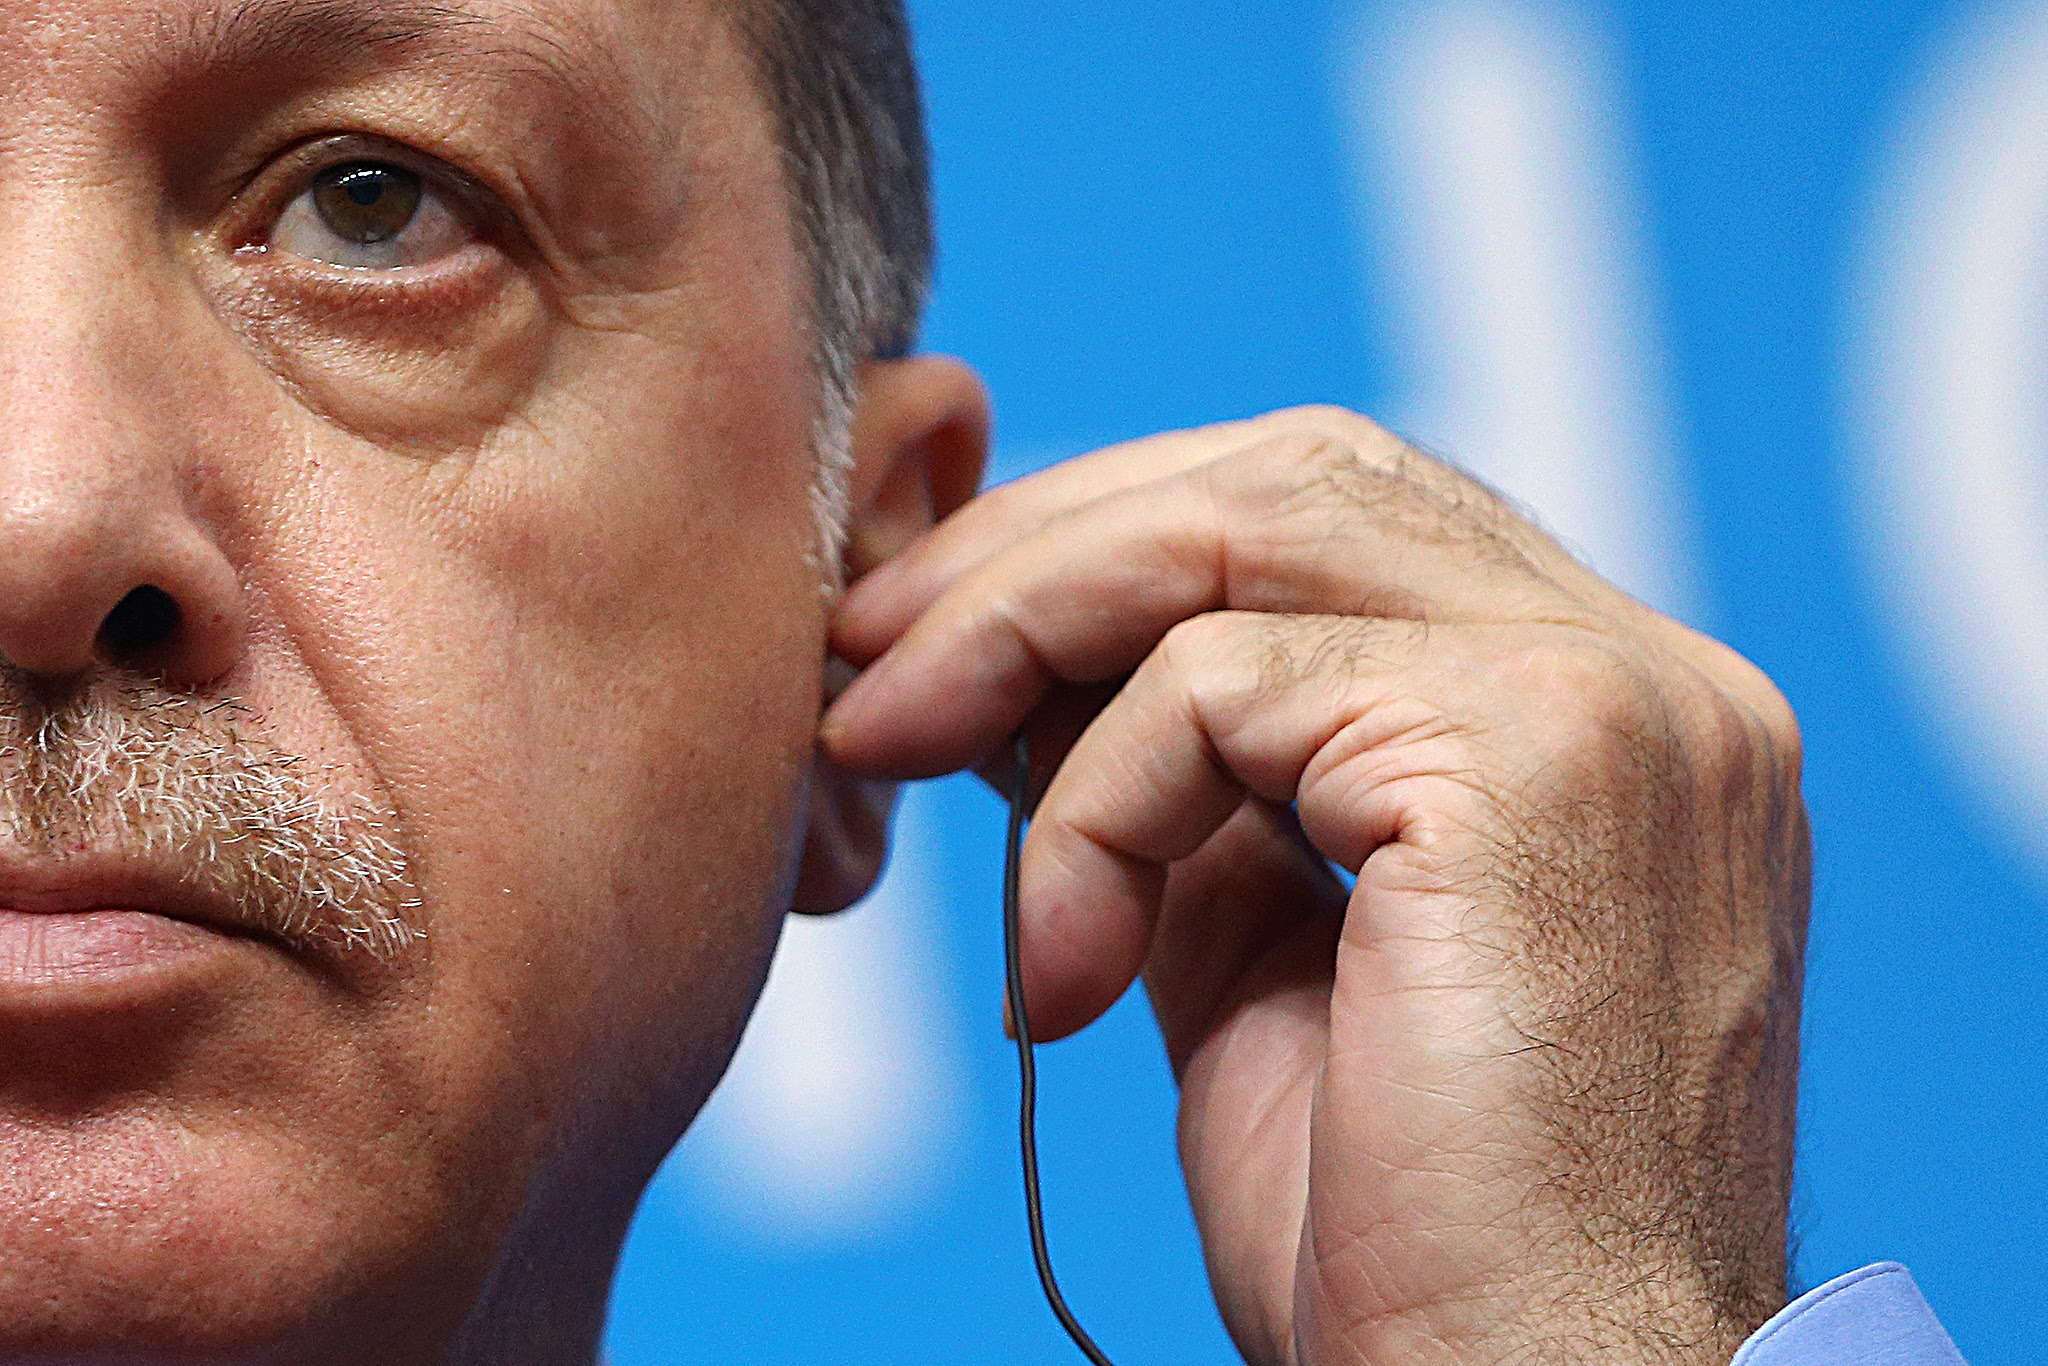 Turkey's President Tayyip Erdogan adjusts earphones during a news conference after the closing of G20 Summit in Hangzhou, Zhejiang Province, China, September 5, 2